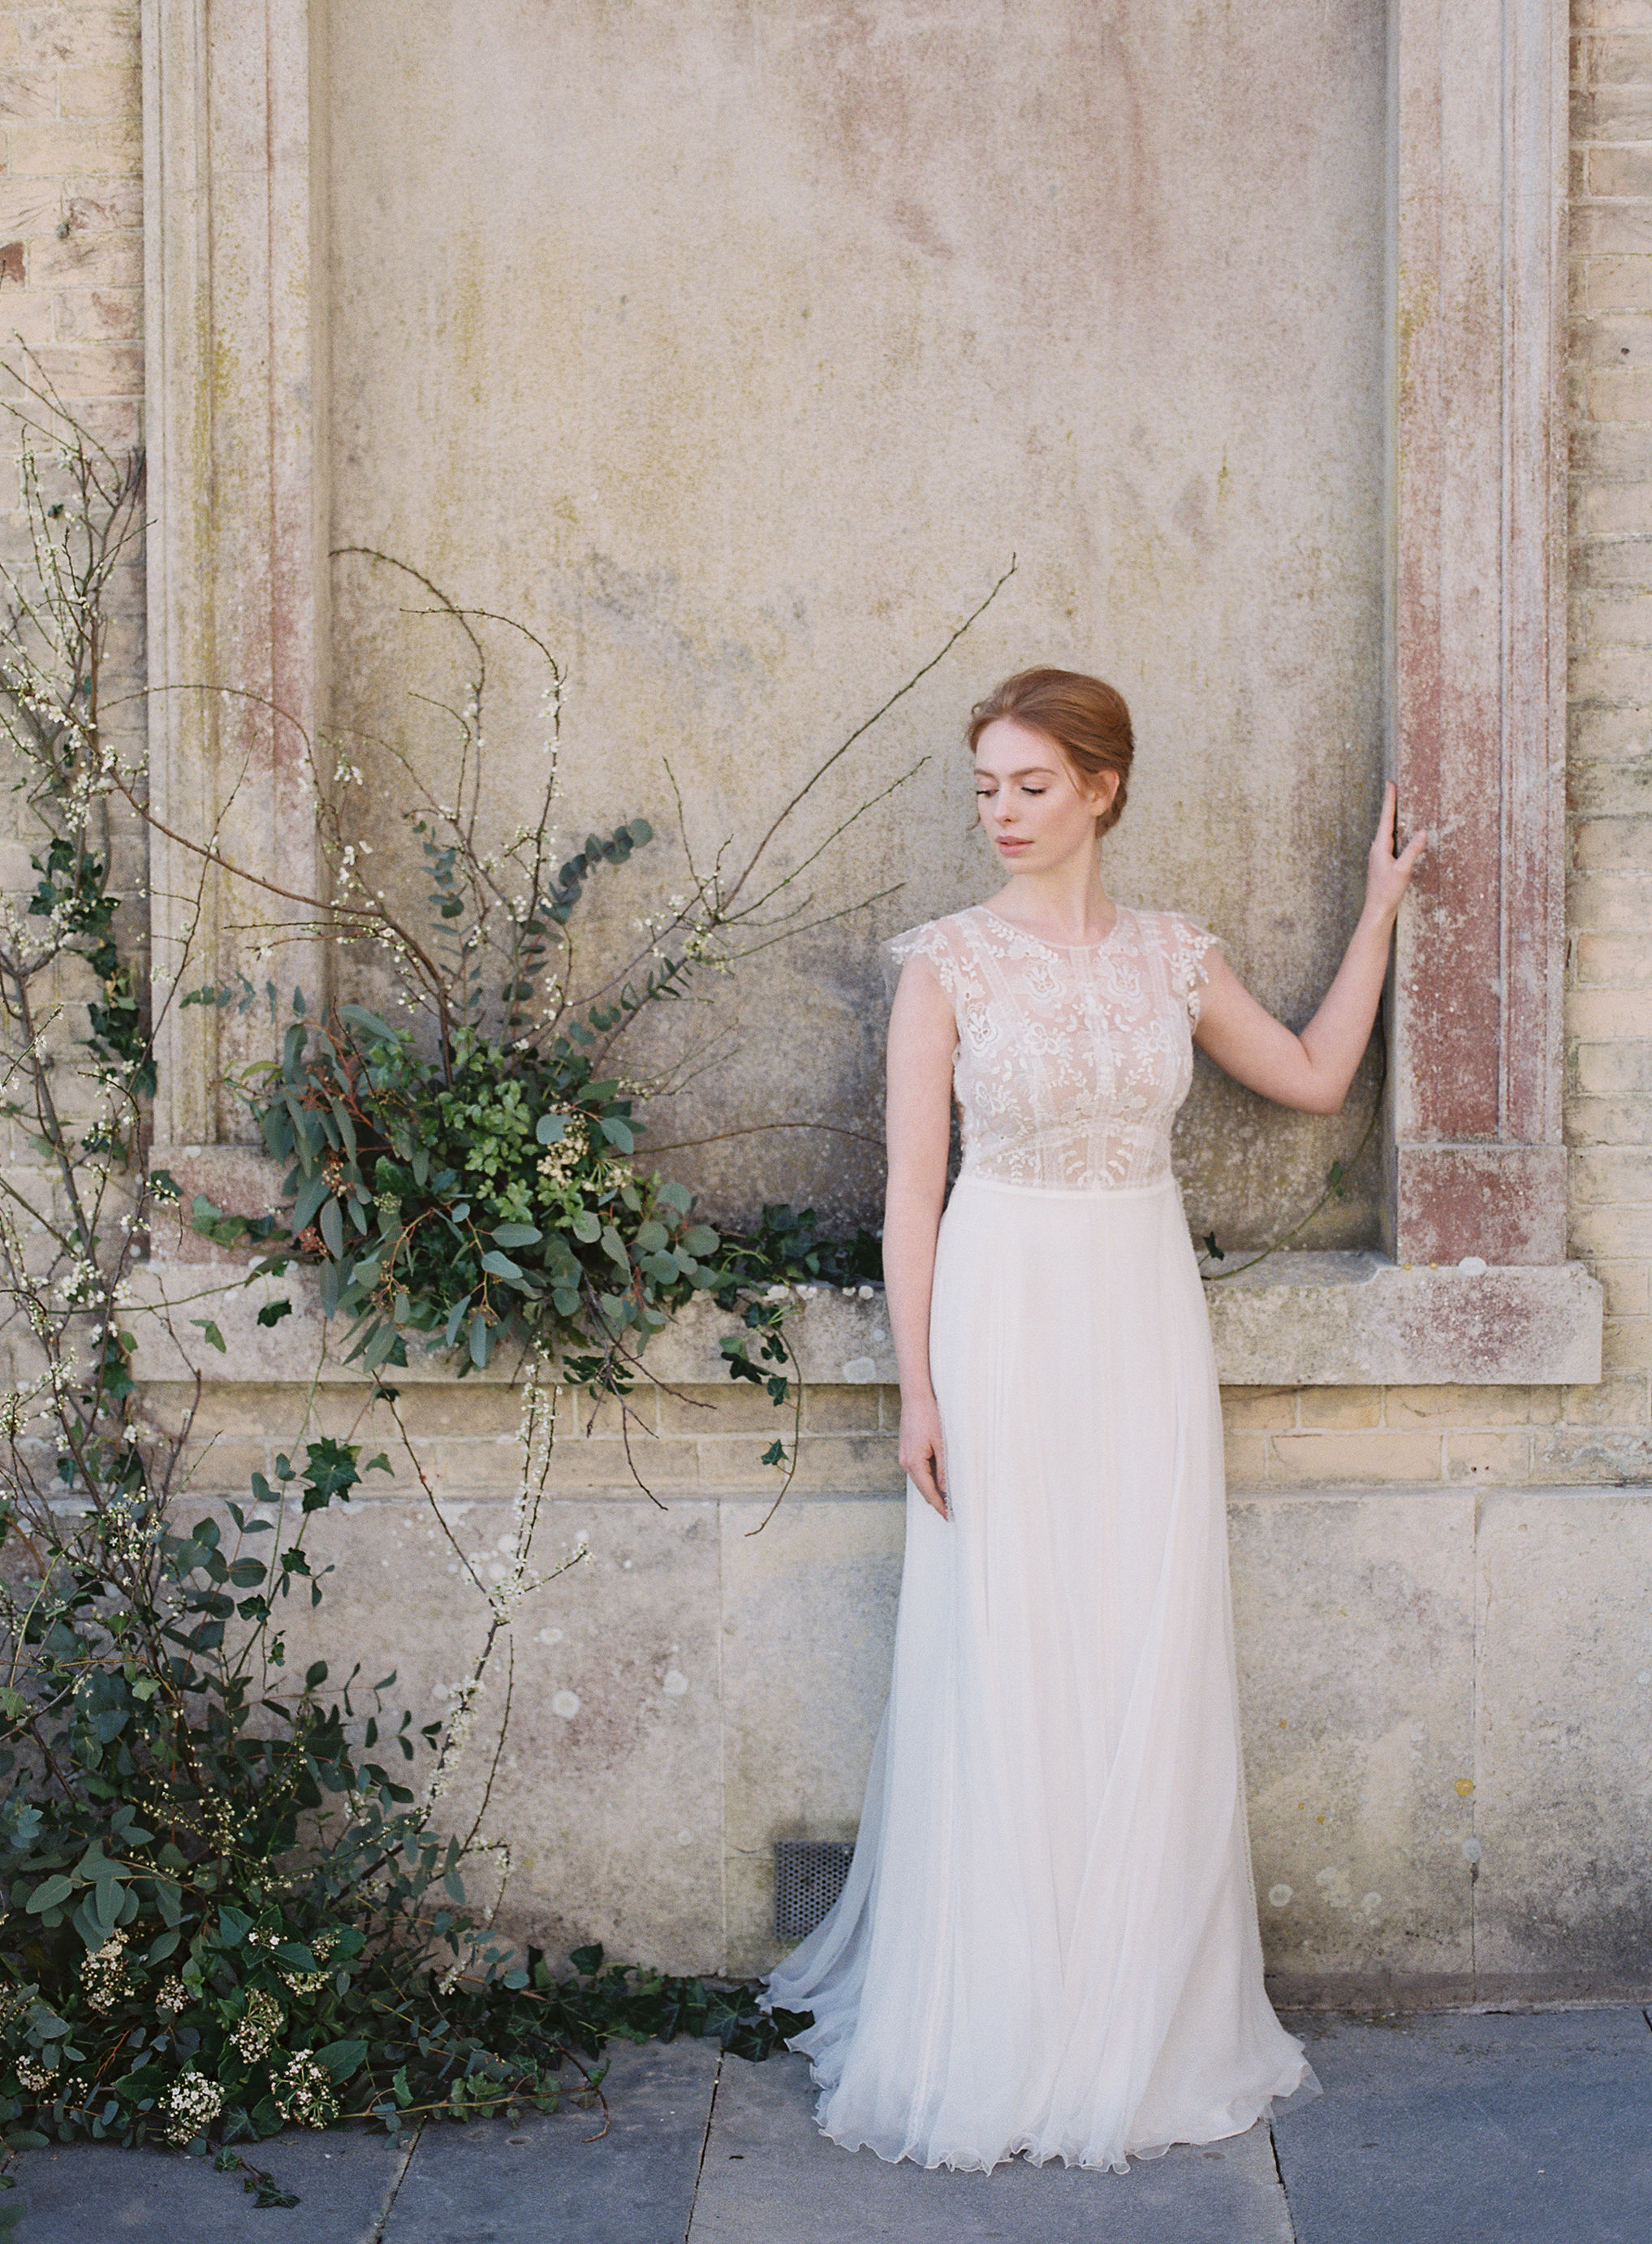 Anna Kara bridal gown for a Spring inspired wedding shoot at heritage venue Somerley House. Photo by Camilla Arnhold